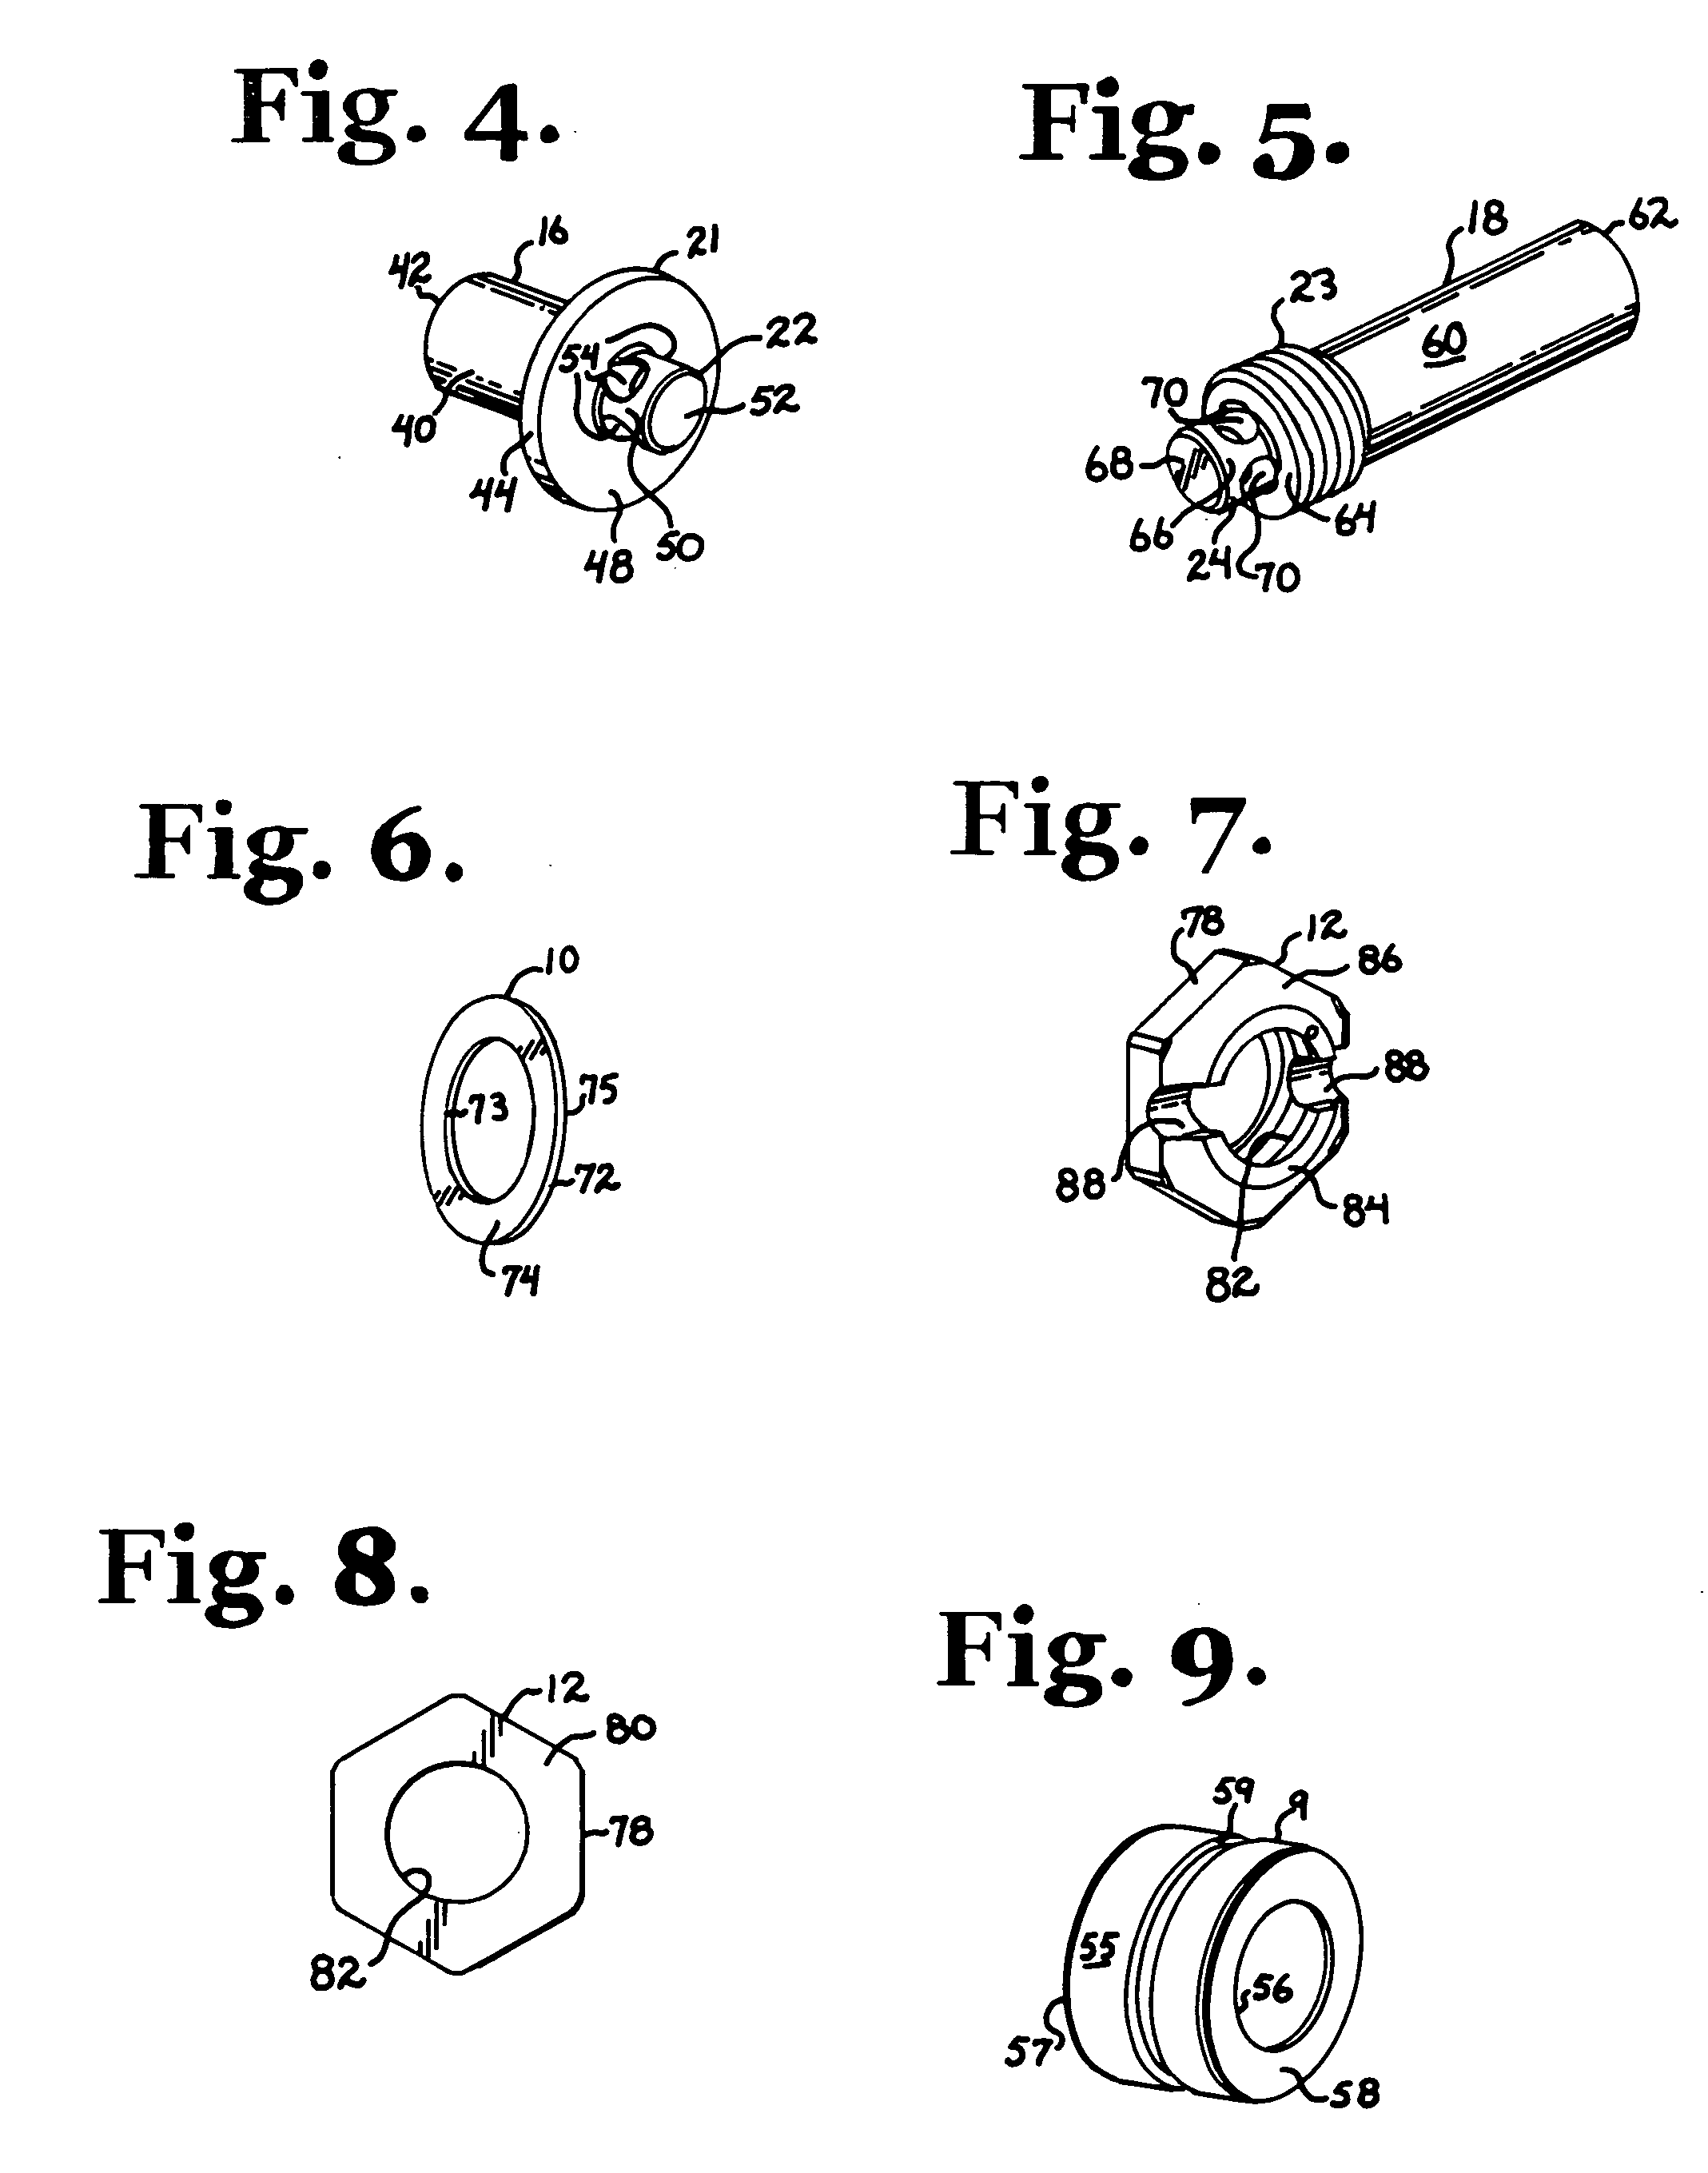 Dynamic stabilization connecting member with molded inner segment and surrounding external elastomer